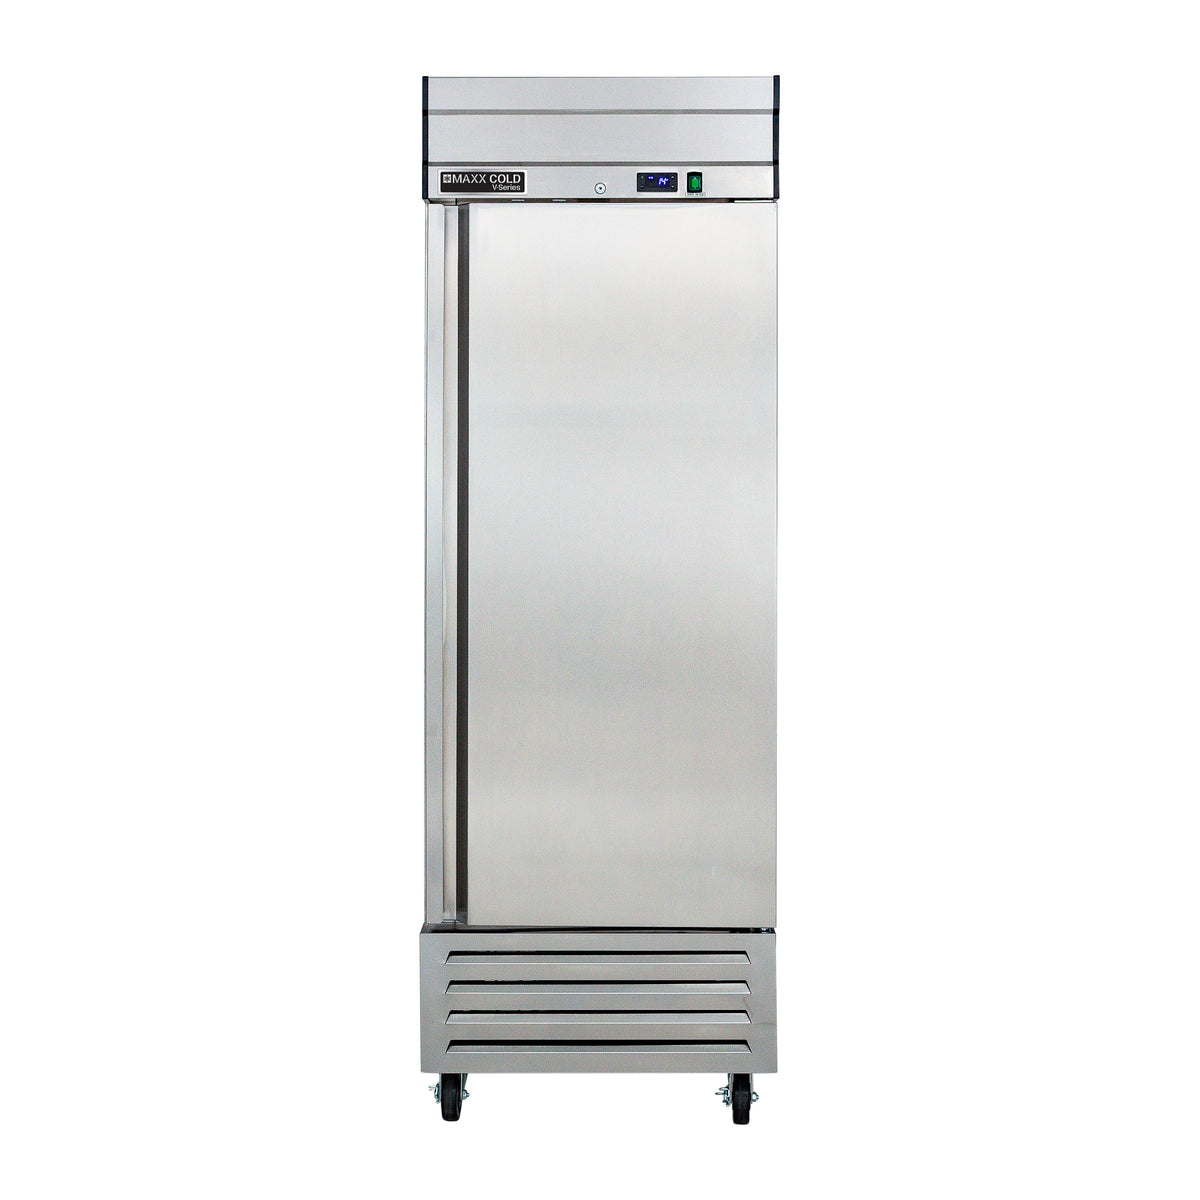 Maxx Cold MVR-23FD V-Series 1 Solid Door Reach-In Refrigerator, Bottom Mount, 27"W, 19 cu. ft. Storage Capacity, in Stainless Steel (MVR-23FDHC)